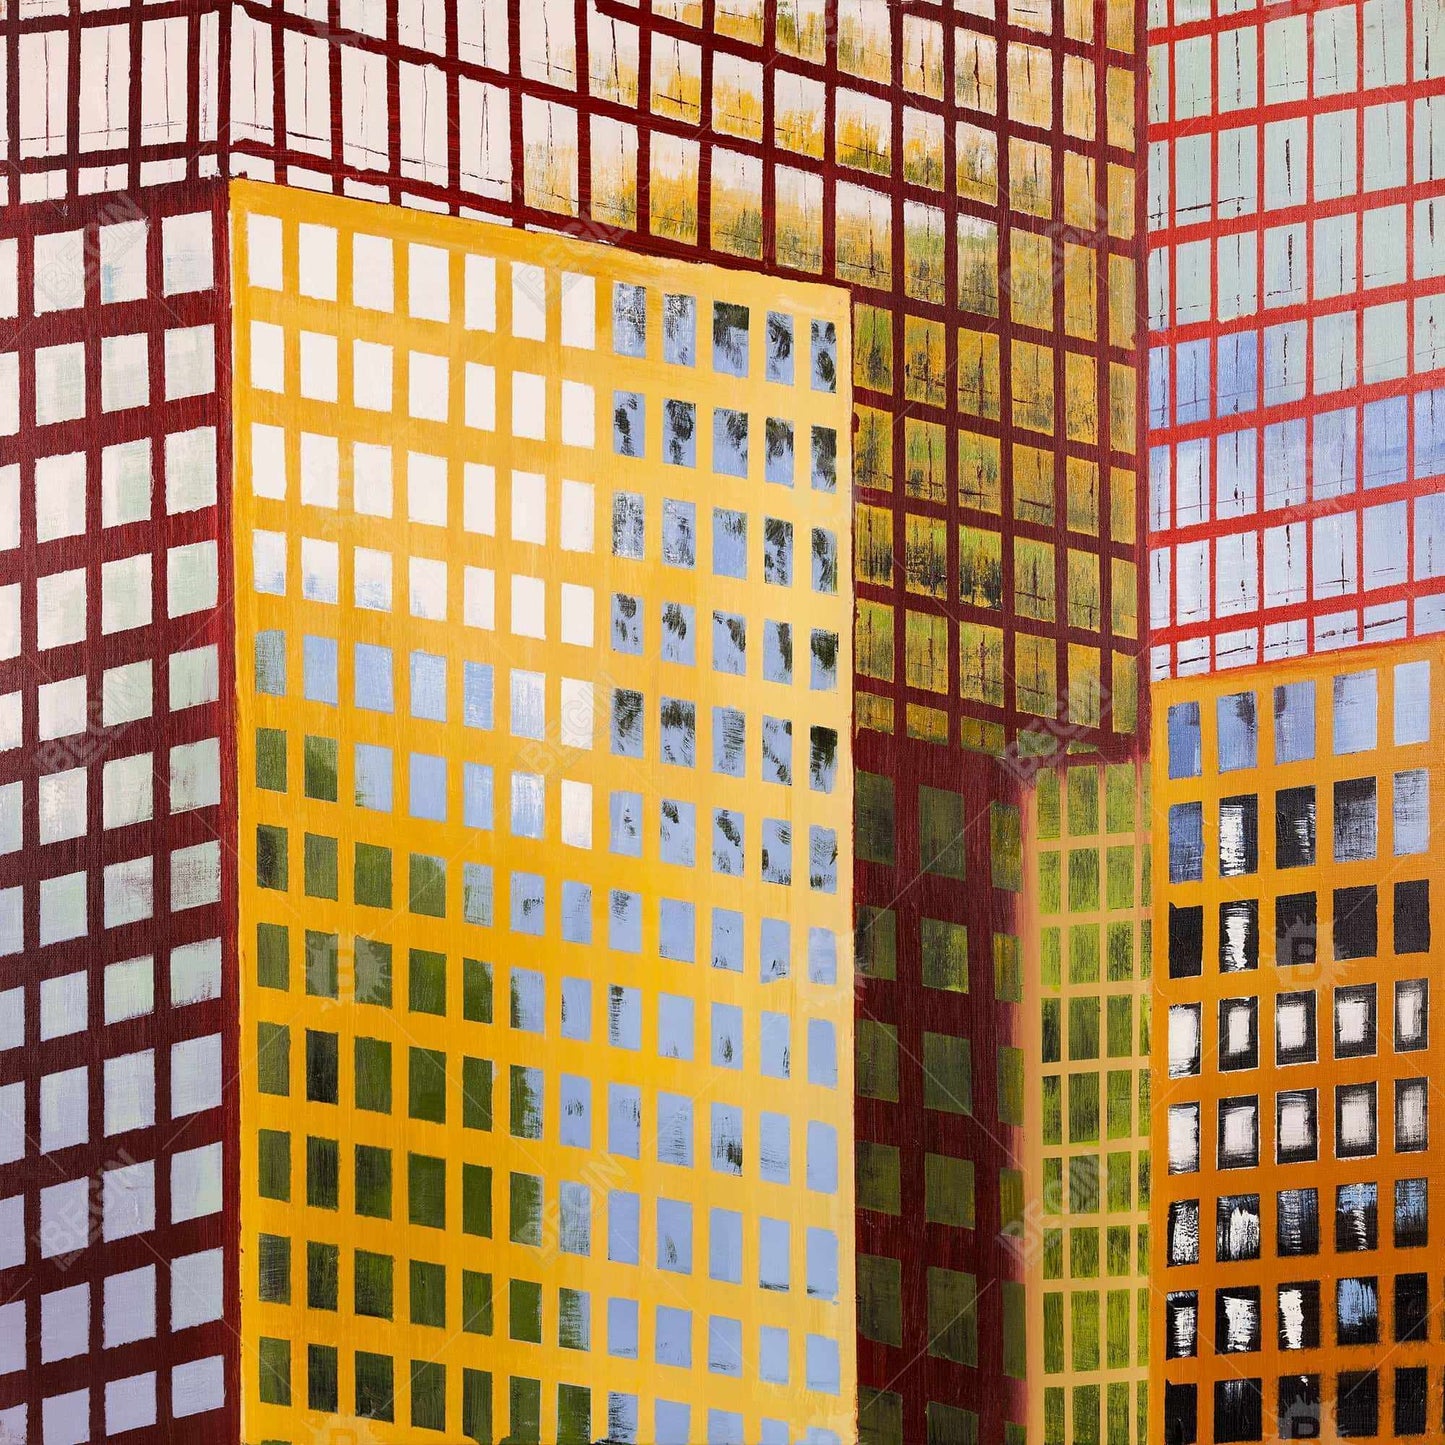 Skyscrapers - 08x08 Print on canvas